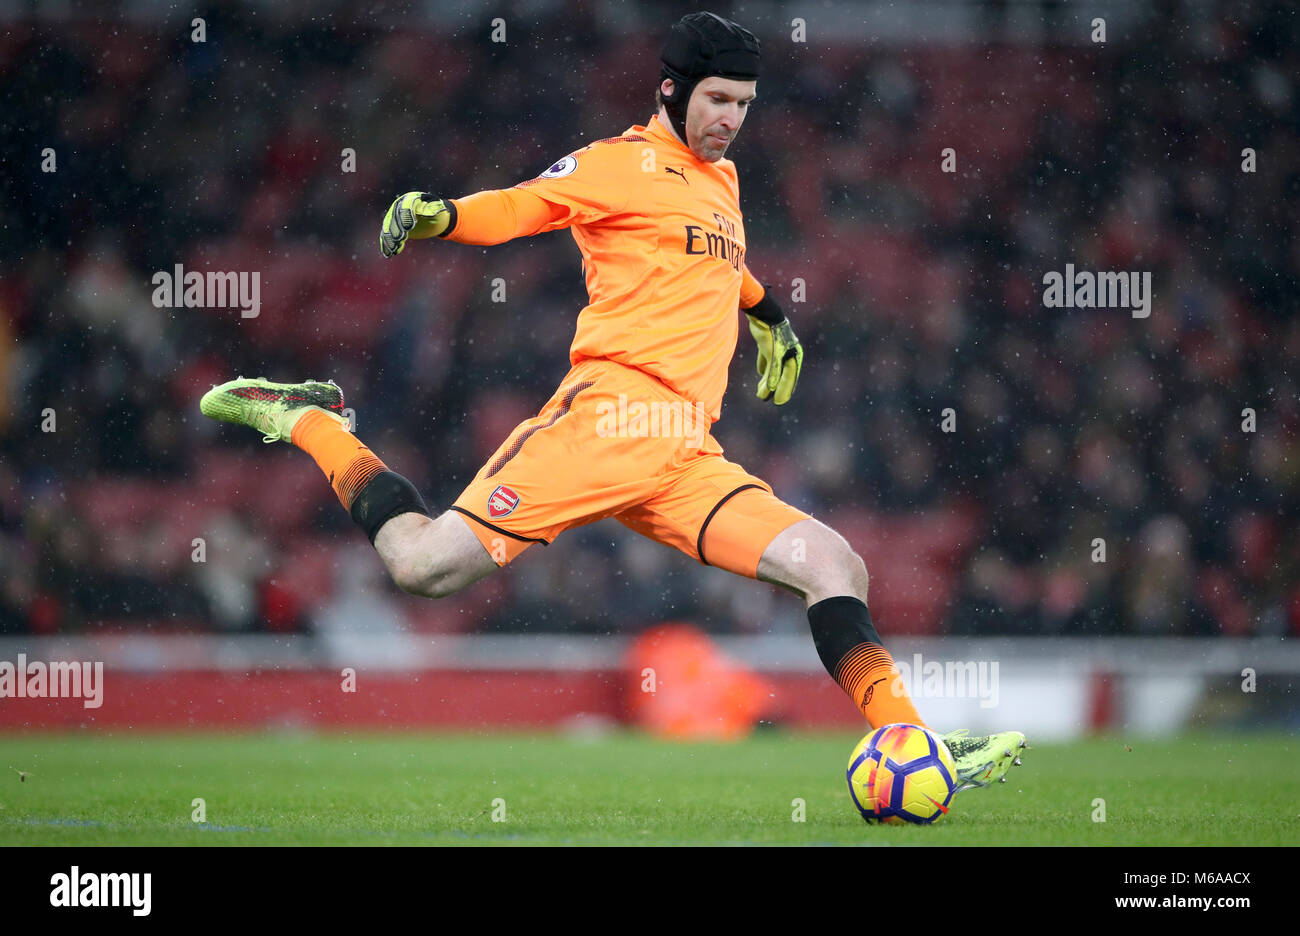 Arsenal goalkeeper Petr Cech during the Premier League match at the Emirates Stadium, London. PRESS ASSOCIATION Photo. Picture date: Thursday March 1, 2018. See PA story SOCCER Arsenal. Photo credit should read: Nick Potts/PA Wire. RESTRICTIONS: No use with unauthorised audio, video, data, fixture lists, club/league logos or 'live' services. Online in-match use limited to 75 images, no video emulation. No use in betting, games or single club/league/player publications. Stock Photo